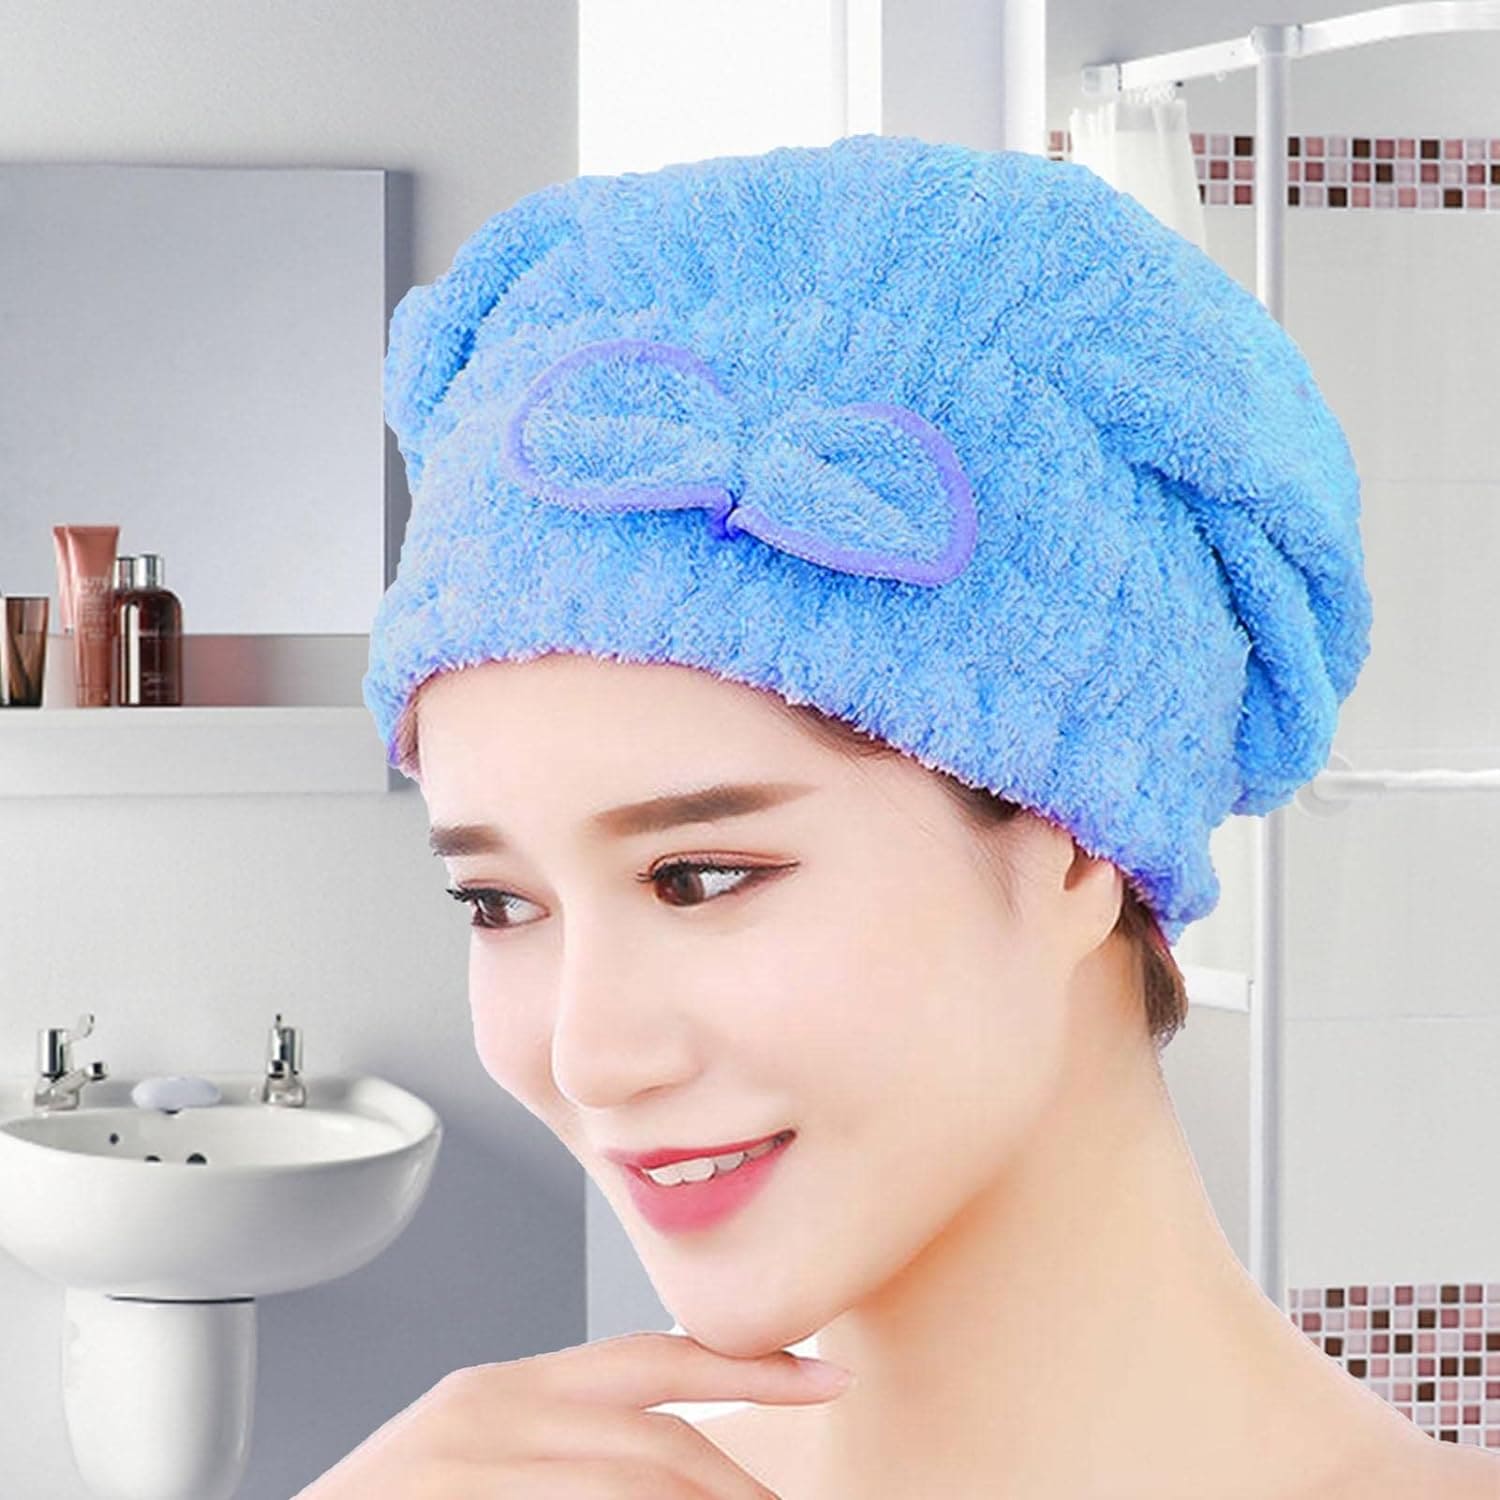 Microfiber Bowknot Towel Wrap, Quick Hair Drying Bath Towel, Spa Bowknot Wrap Towel Hat, Cap for Bath Bathroom, Comfortable Bath Spa Cap, Turban for Drying Curly Long Thick Hair, Highly Absorbent Hair Drying Towel